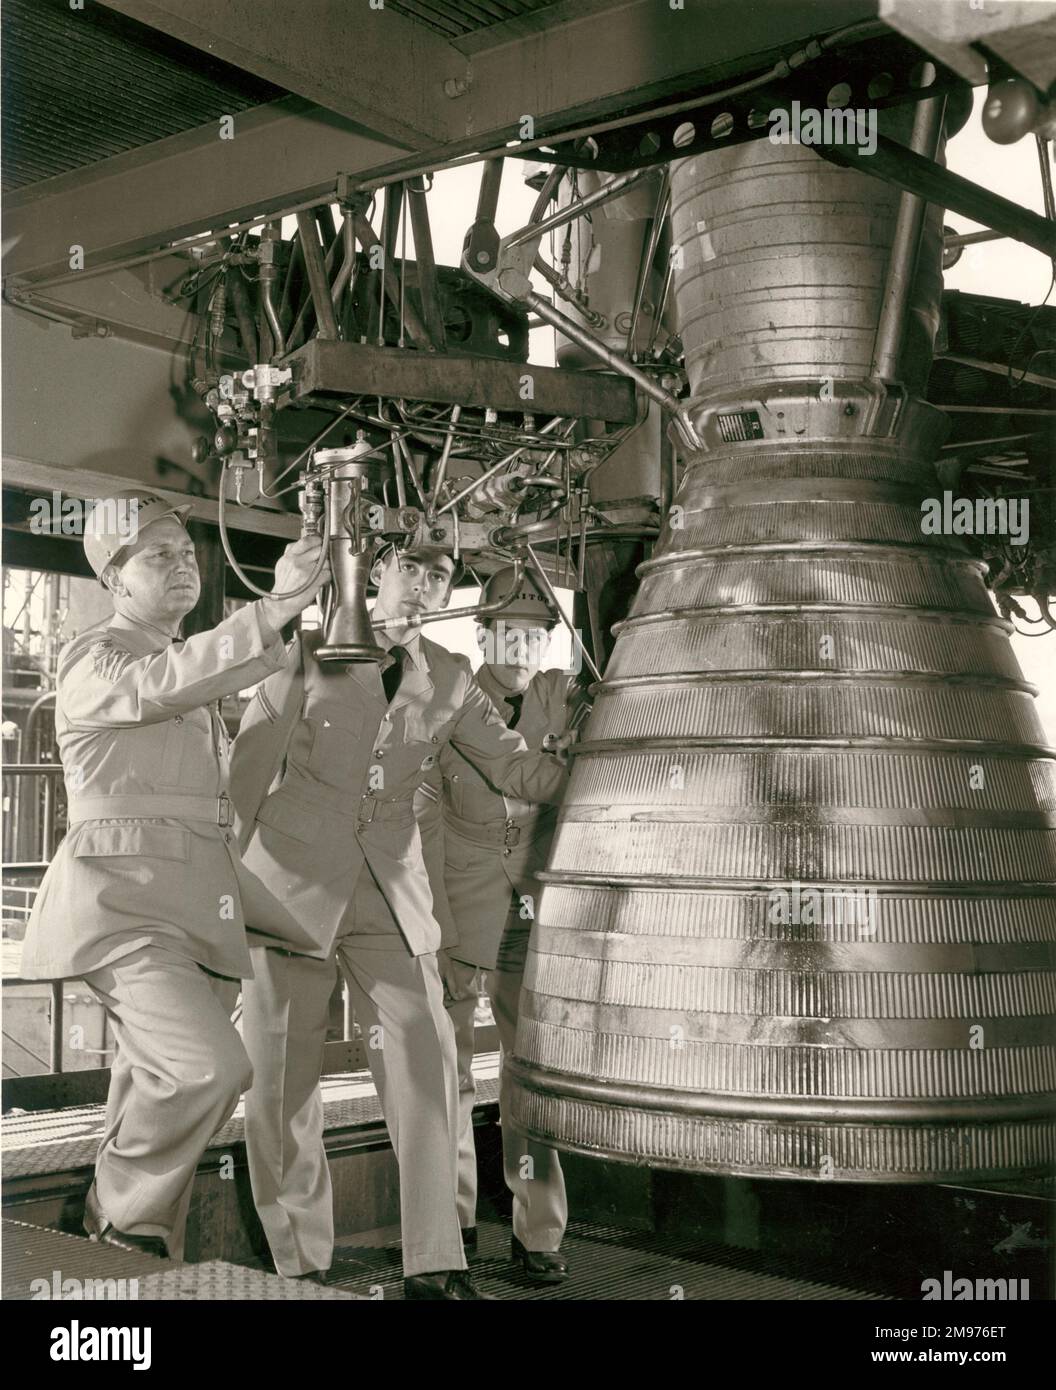 RAF personnel, completing a 13-week training course on the Thor propulsion system at Rocketdyne. From left: Chief Technician Sidney Allen, Junior Technician Graham R.J. Fryer and Corporal Technician John G. Webb. Stock Photo